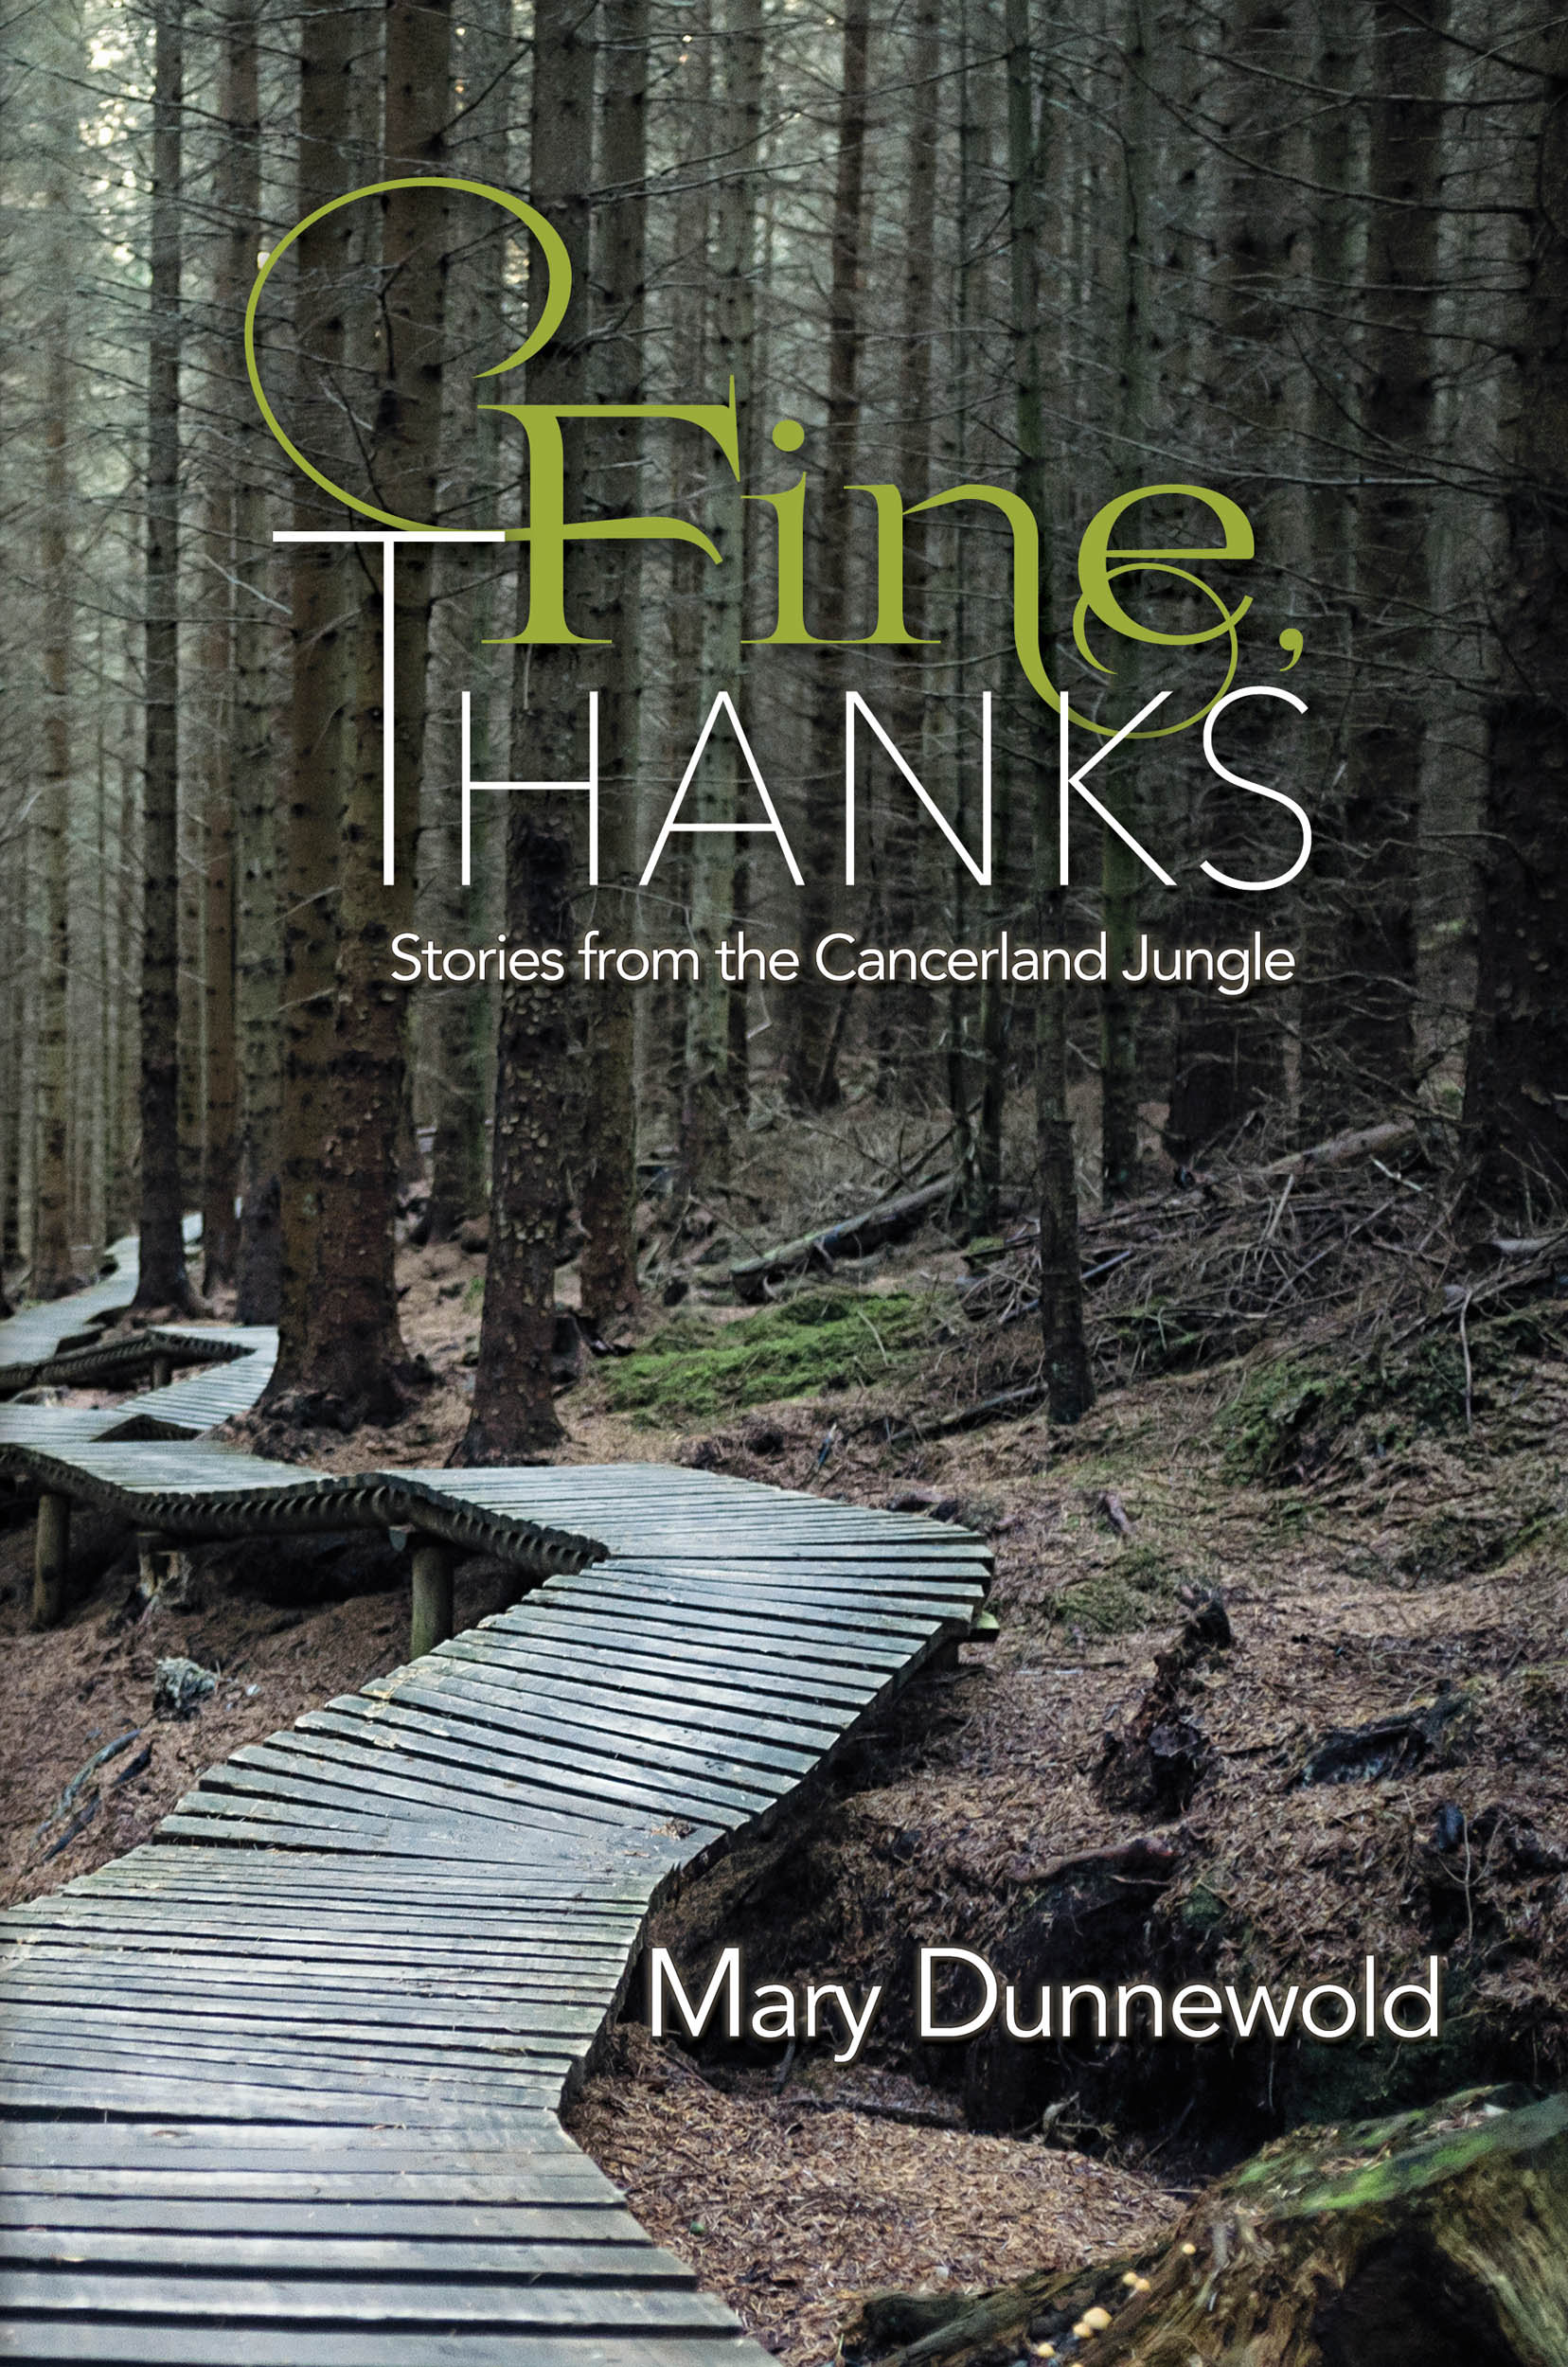 FREE: Fine, Thanks: Stories from the Cancerland Jungle by Mary Dunnewold